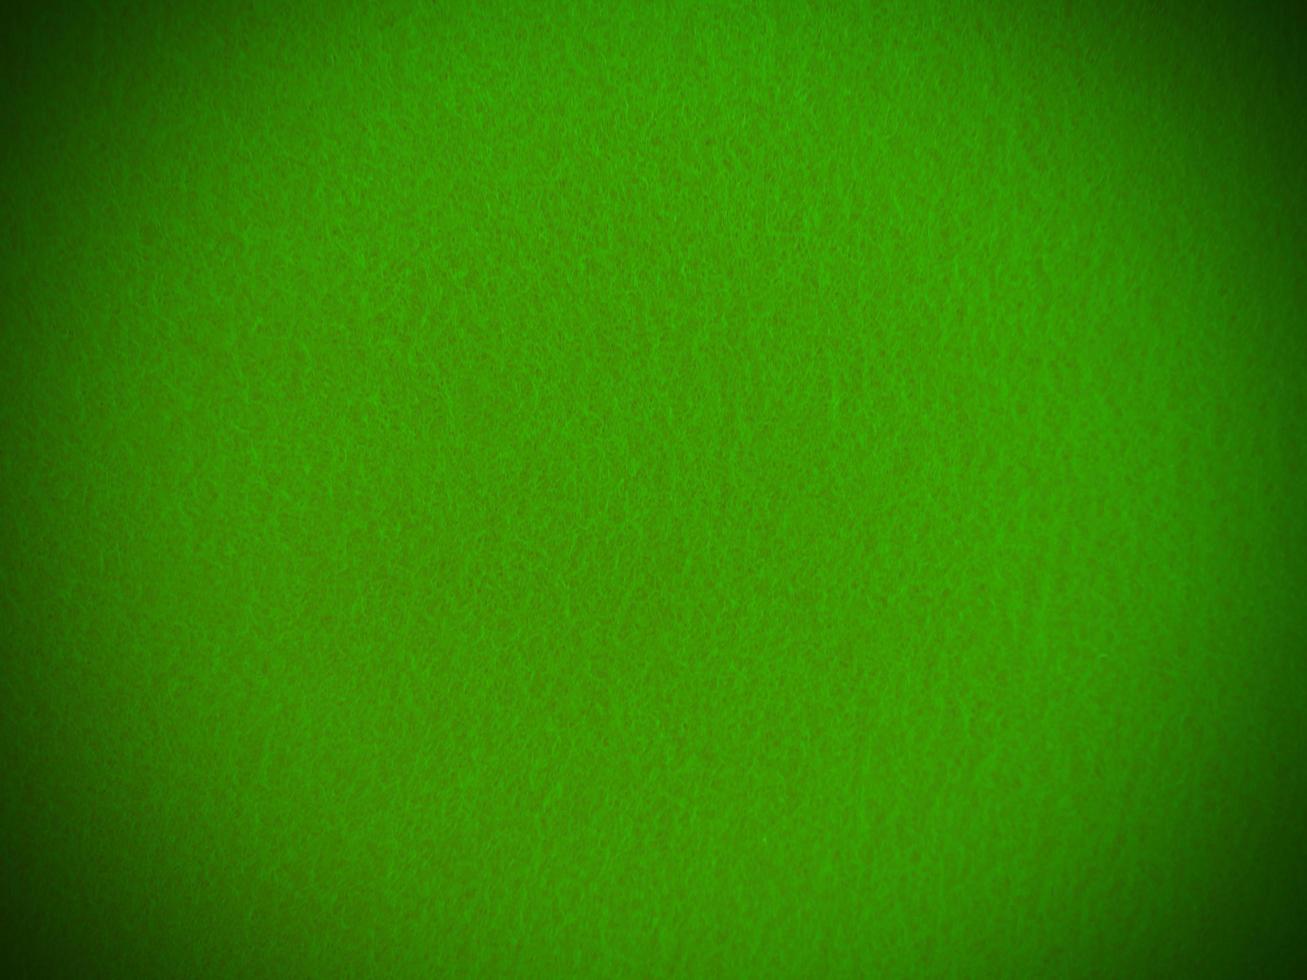 Felt Texture Stock Photos, Images and Backgrounds for Free Download